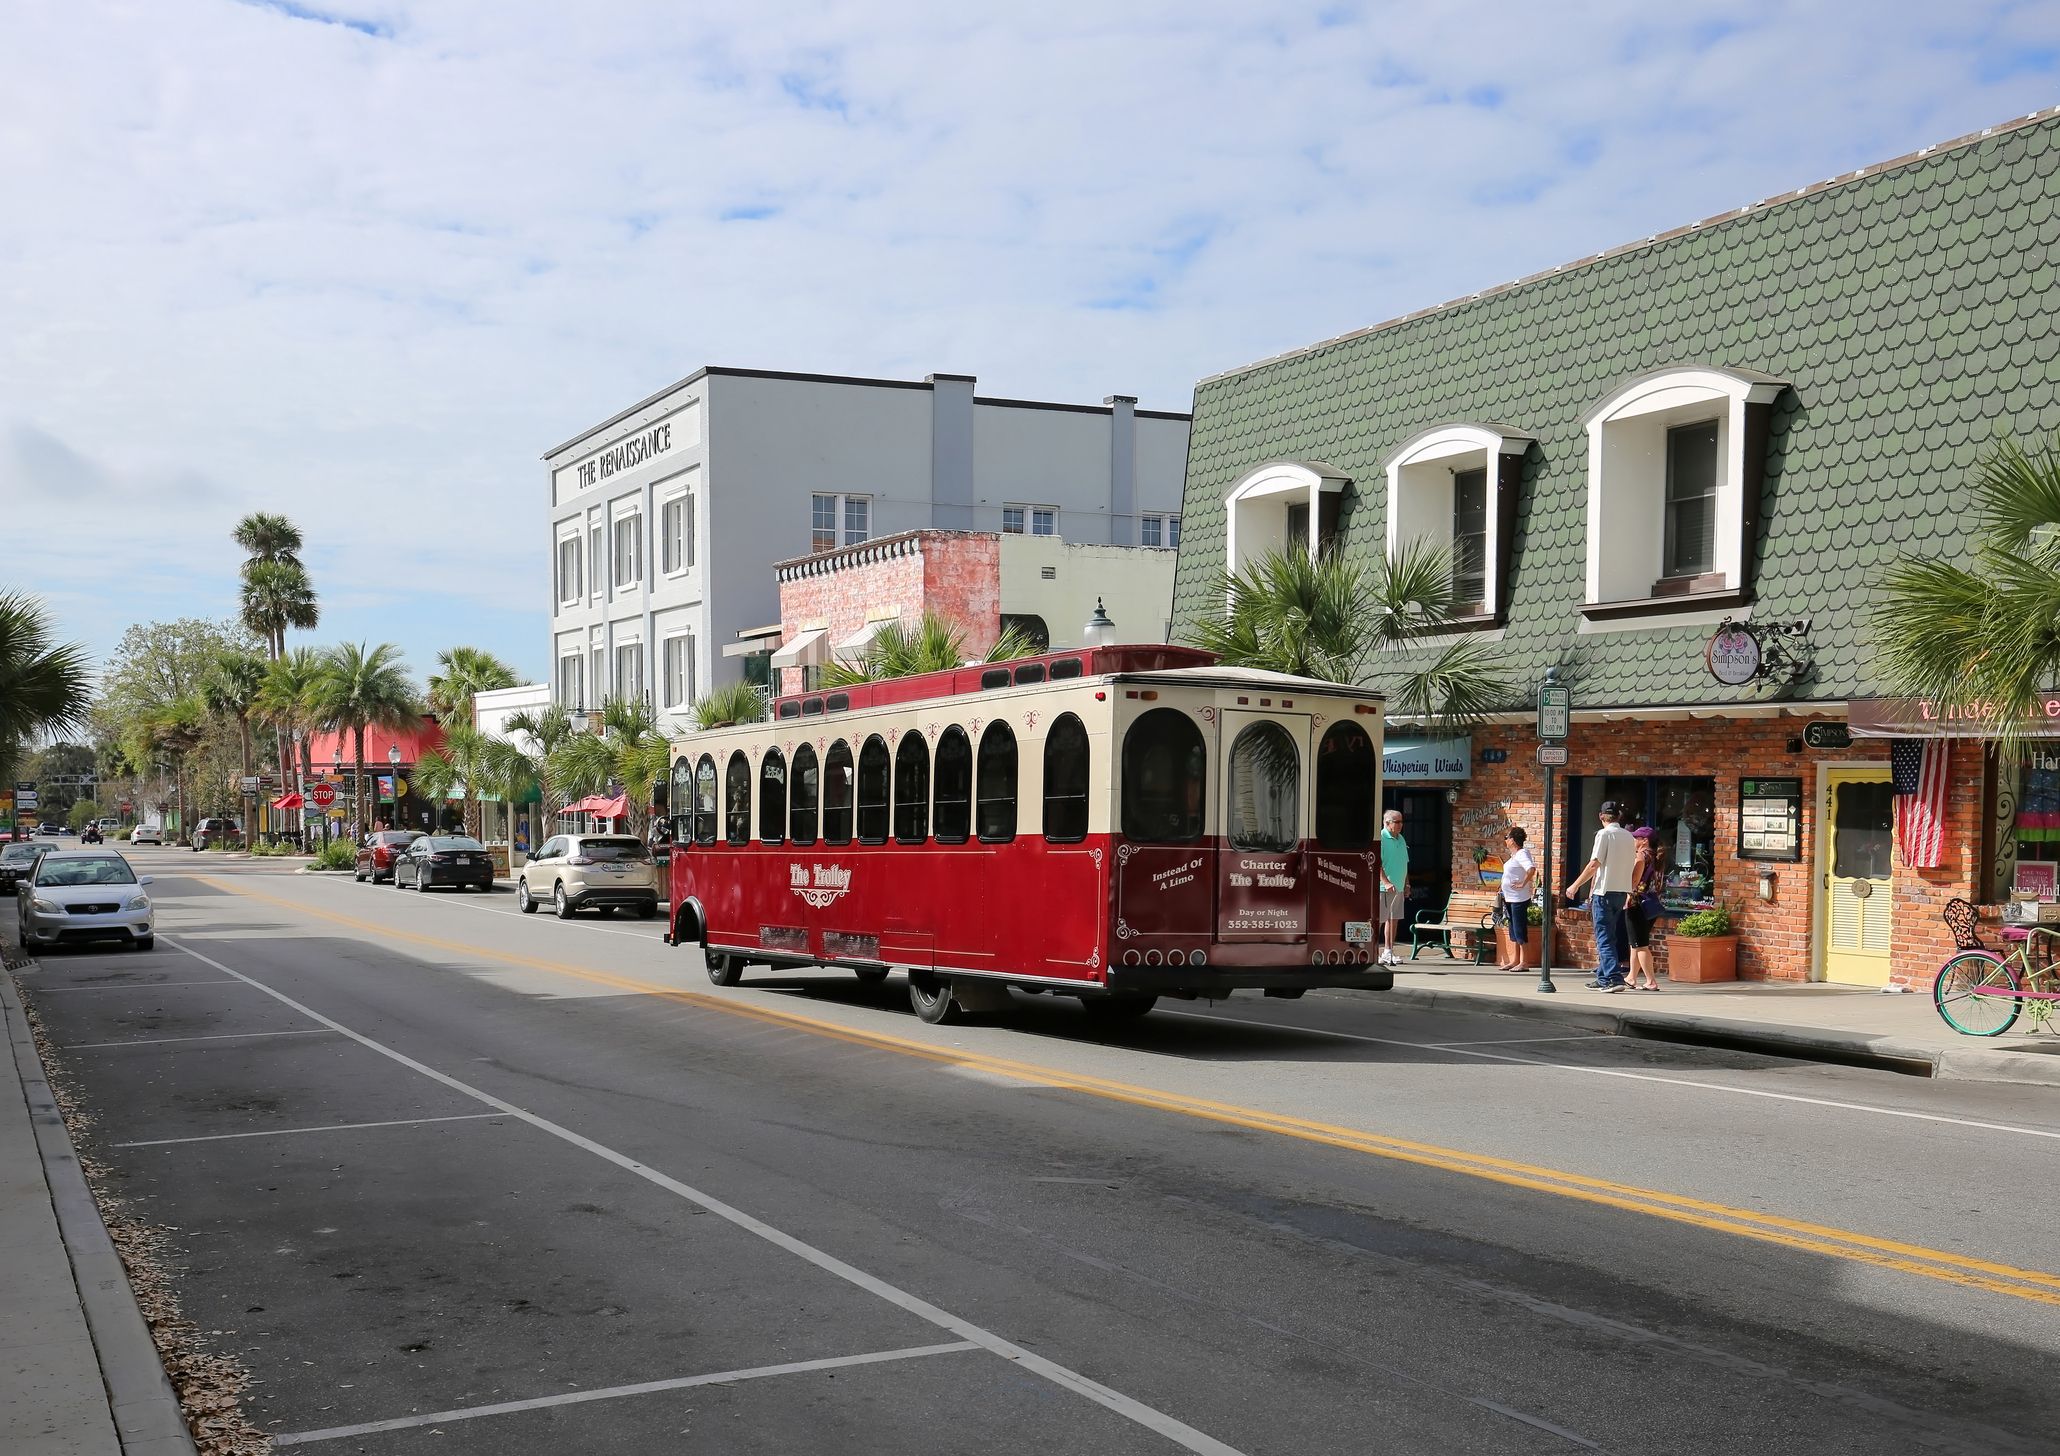 A view of Donnelly Street in downtown Mount Dora, Florida